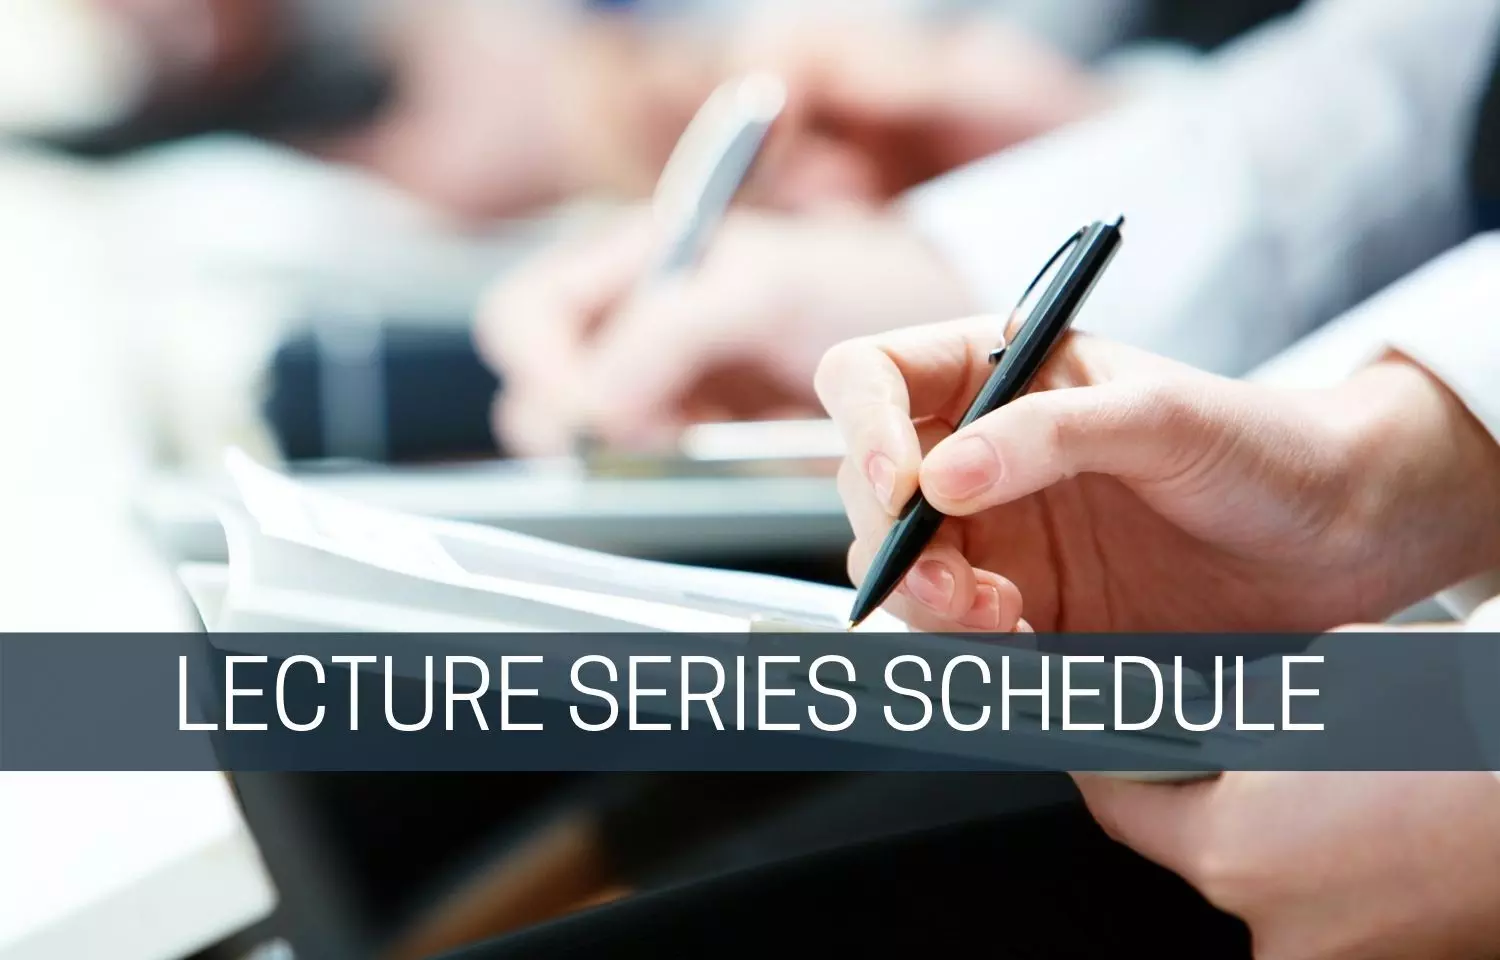 CPS Mumbai Releases Lecture Series Schedule For DMRE Part I, FCPS Orthopaedics, details